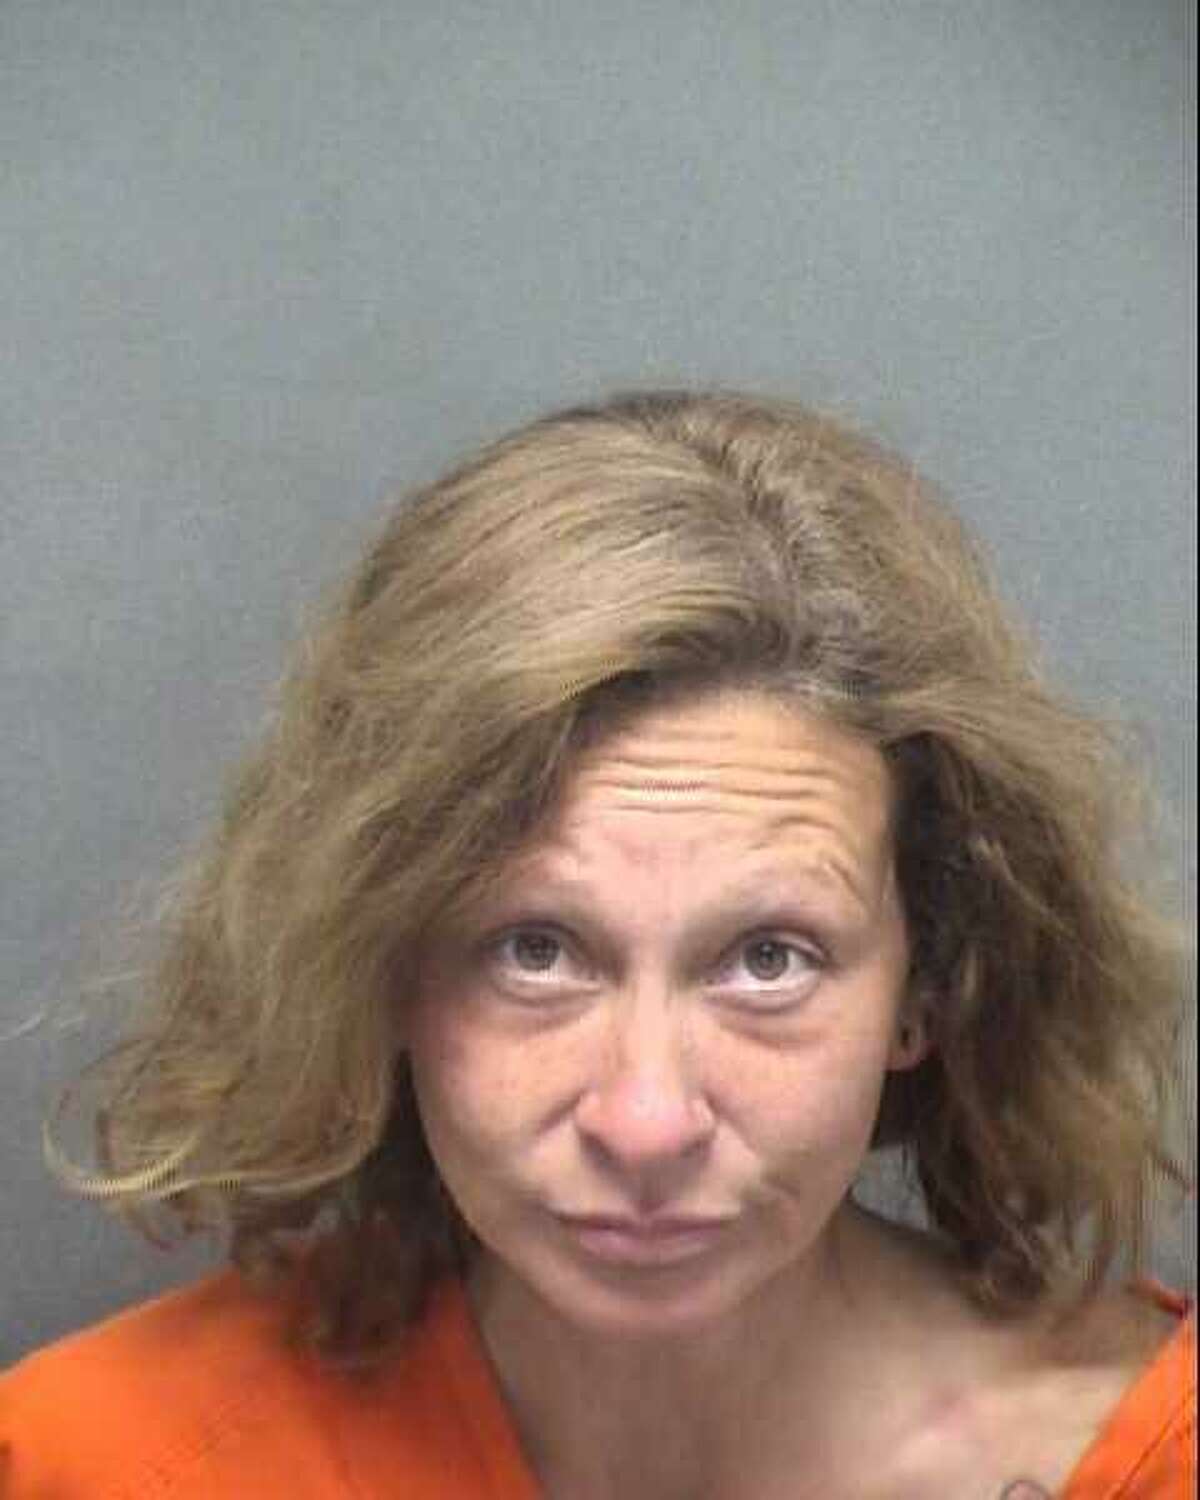 Genevieve Golden, 38, is accused of trying to escape the Bexar County Jail Annex early Saturday morning.